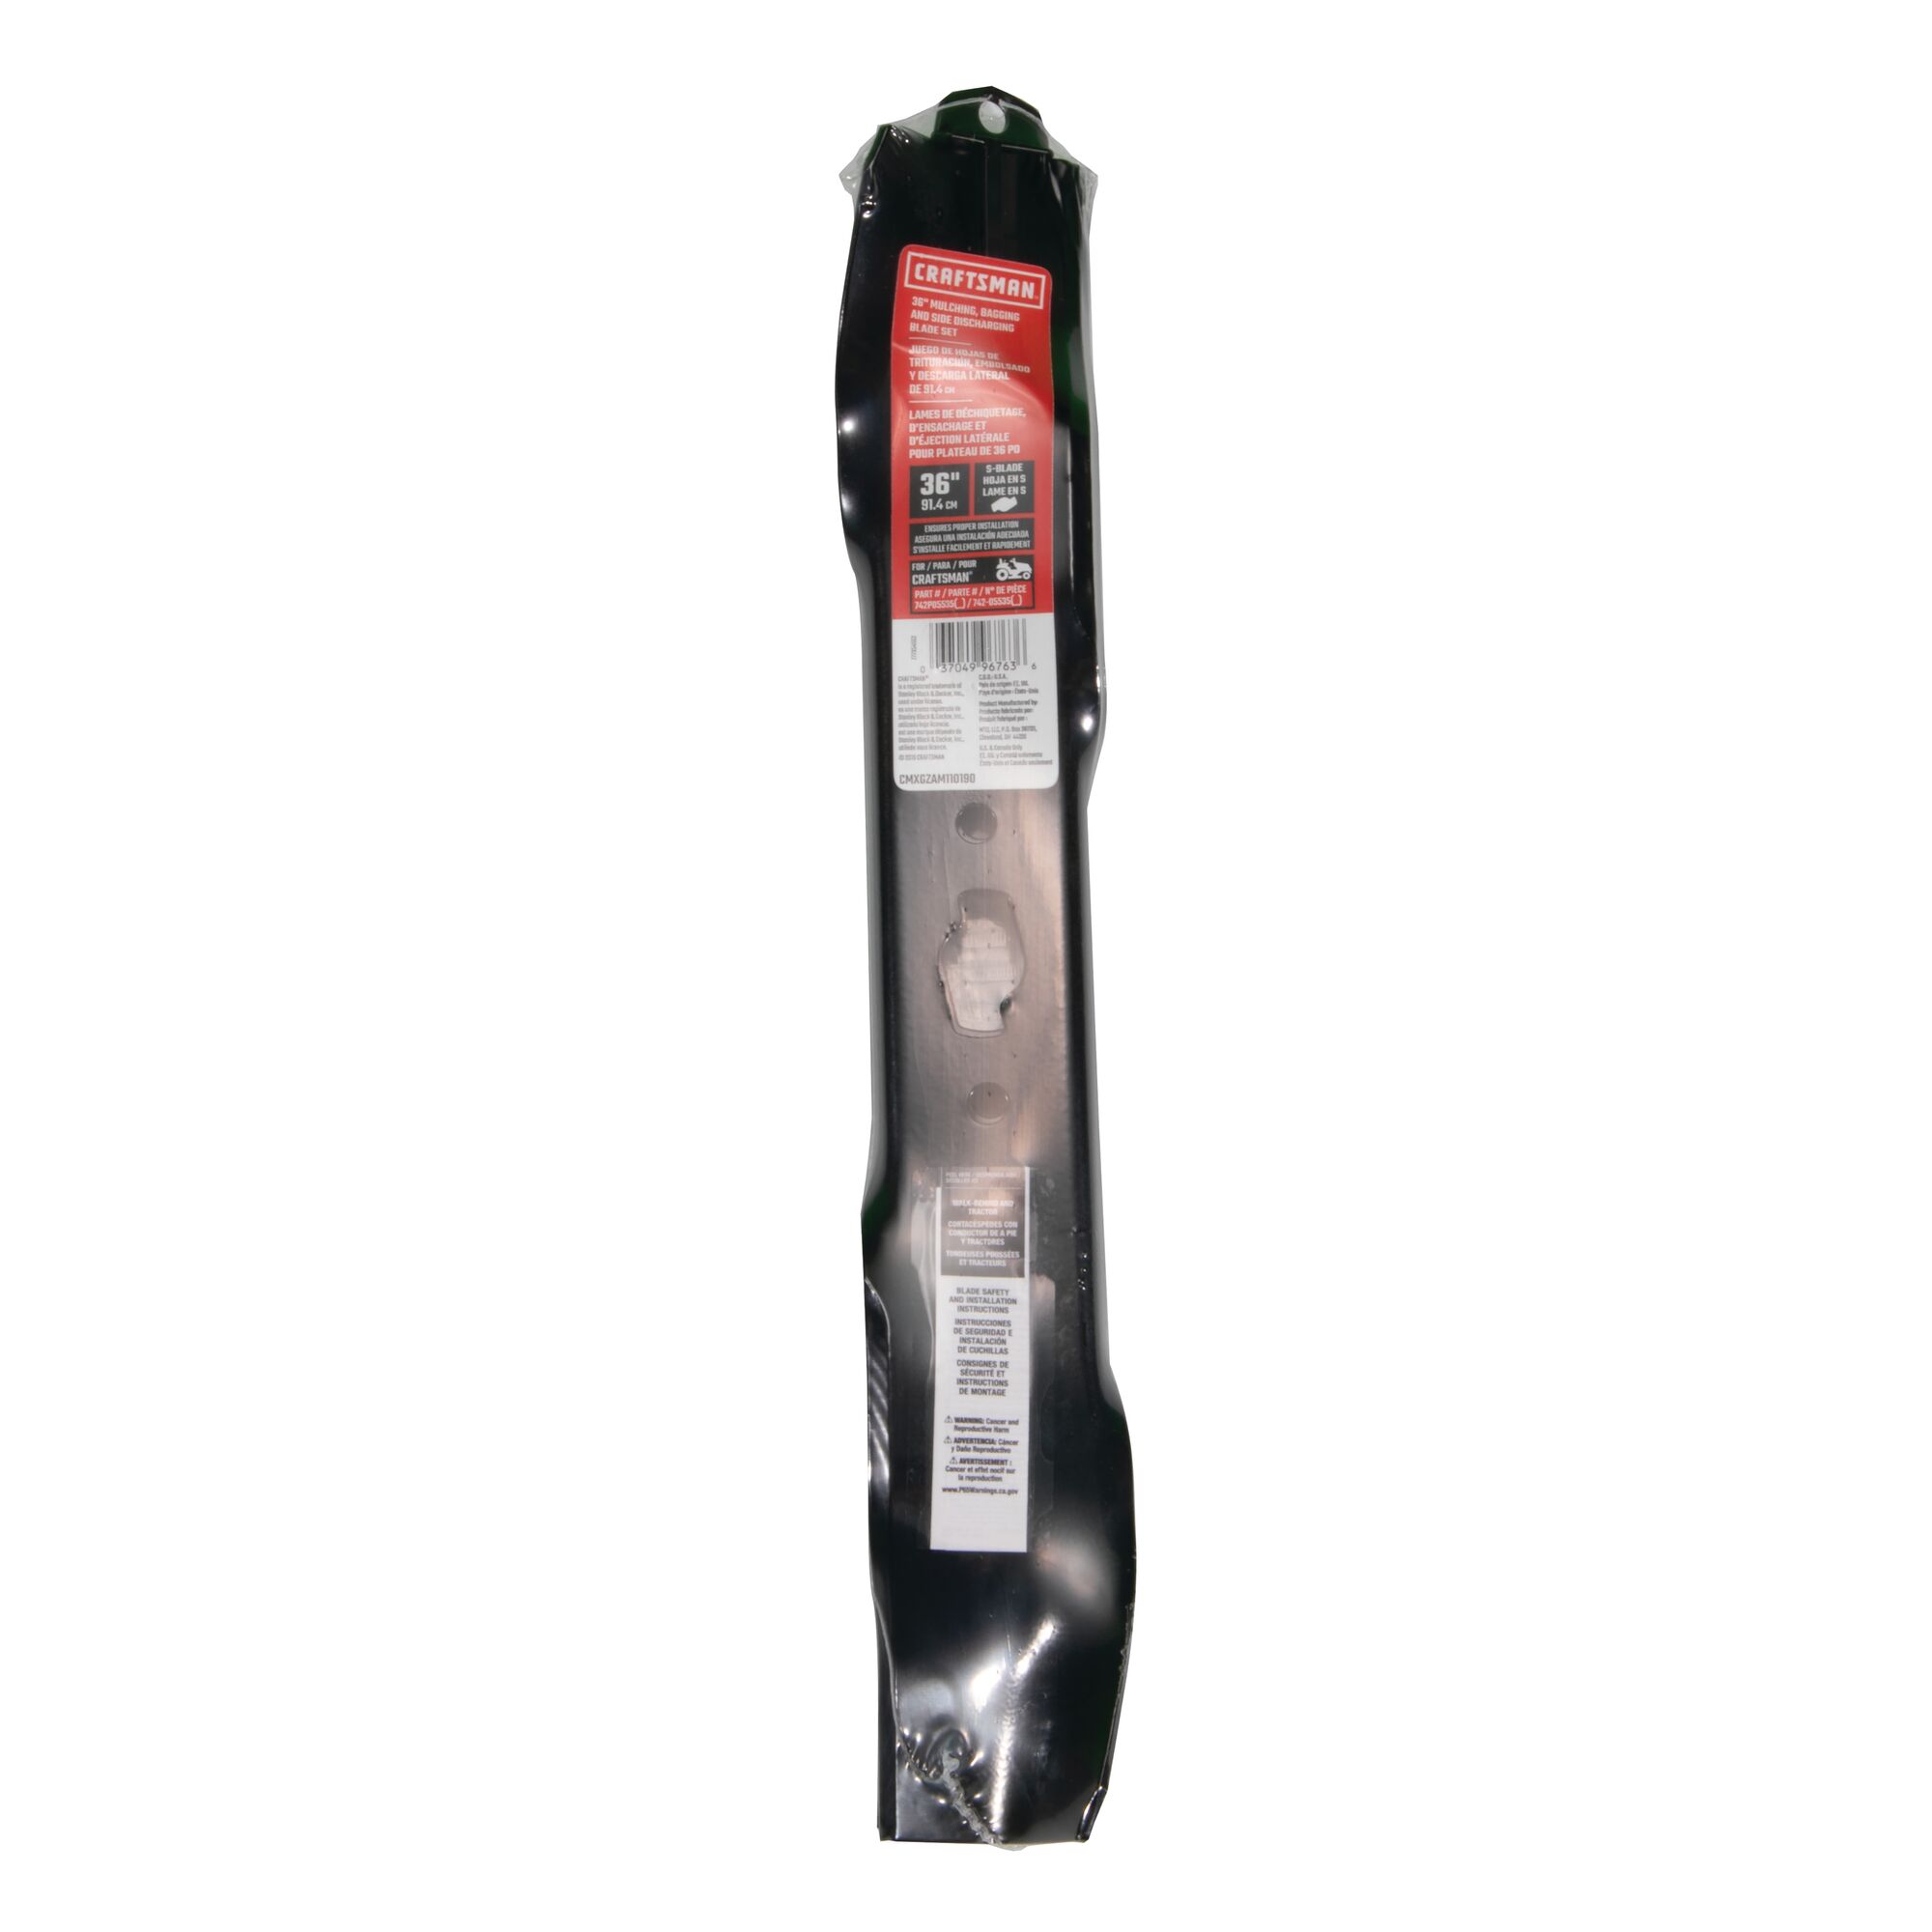 36 Inch Mulching Bagging and Side Discharging Blade Set in plastic packaging.